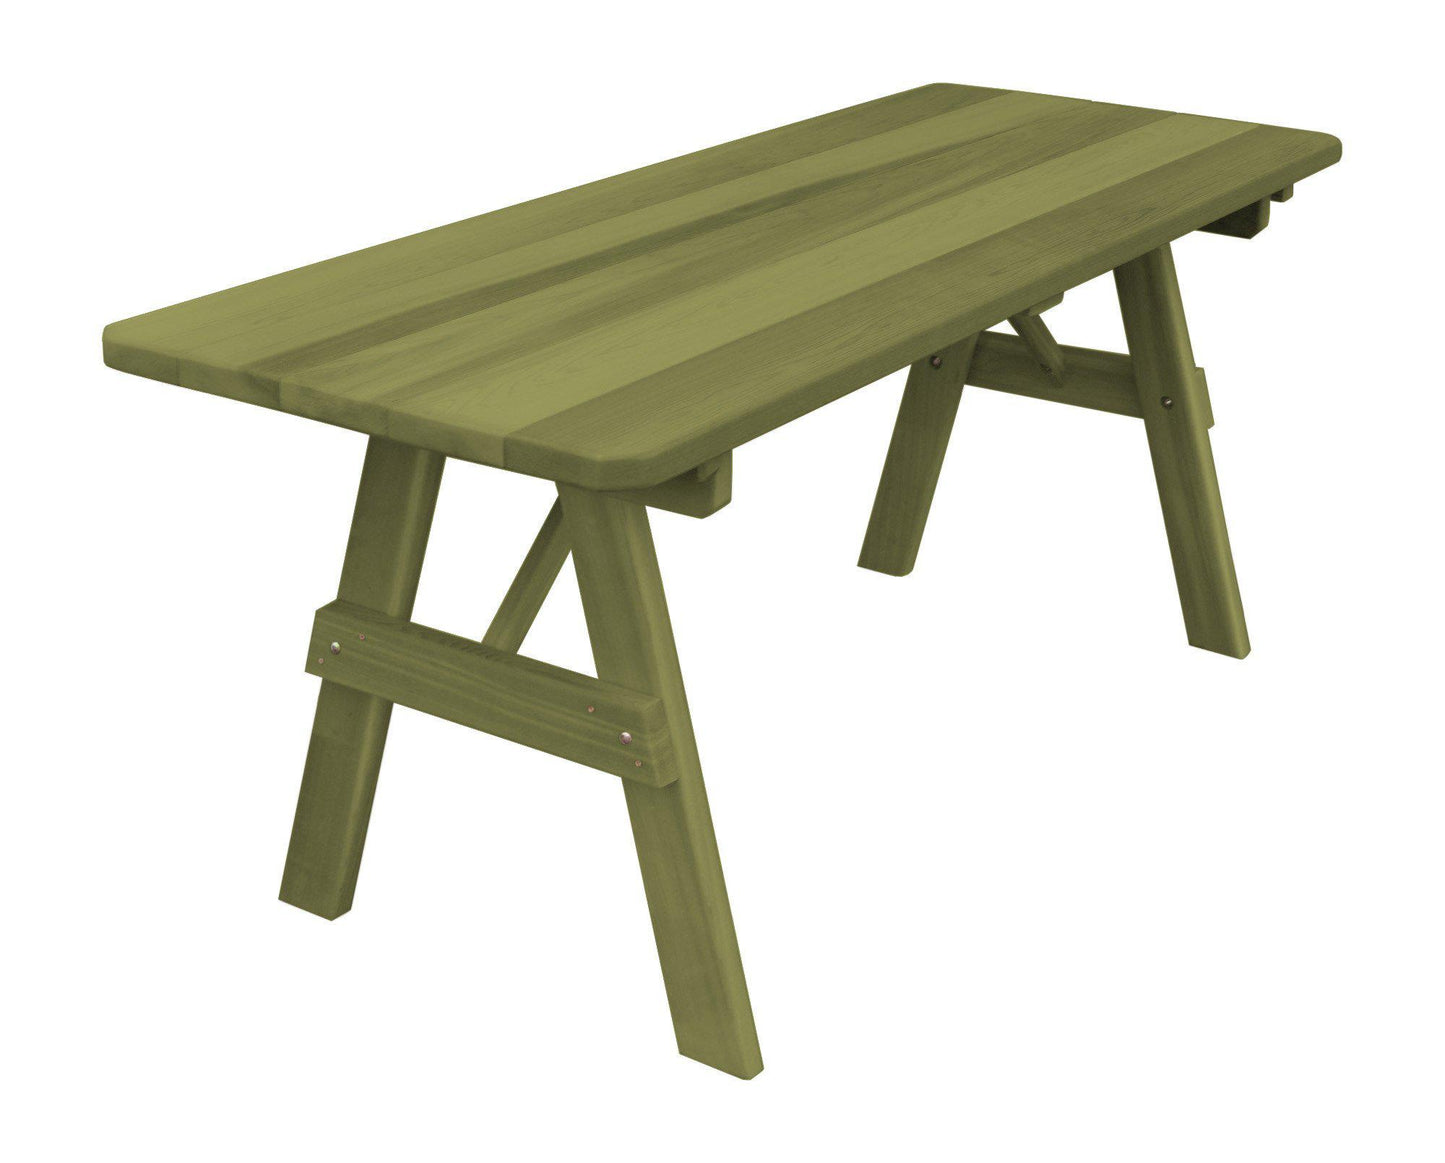 A&L FURNITURE CO. Western Red Cedar 94" Traditional Table Only - Specify for FREE 2" Umbrella Hole - LEAD TIME TO SHIP 2 WEEKS